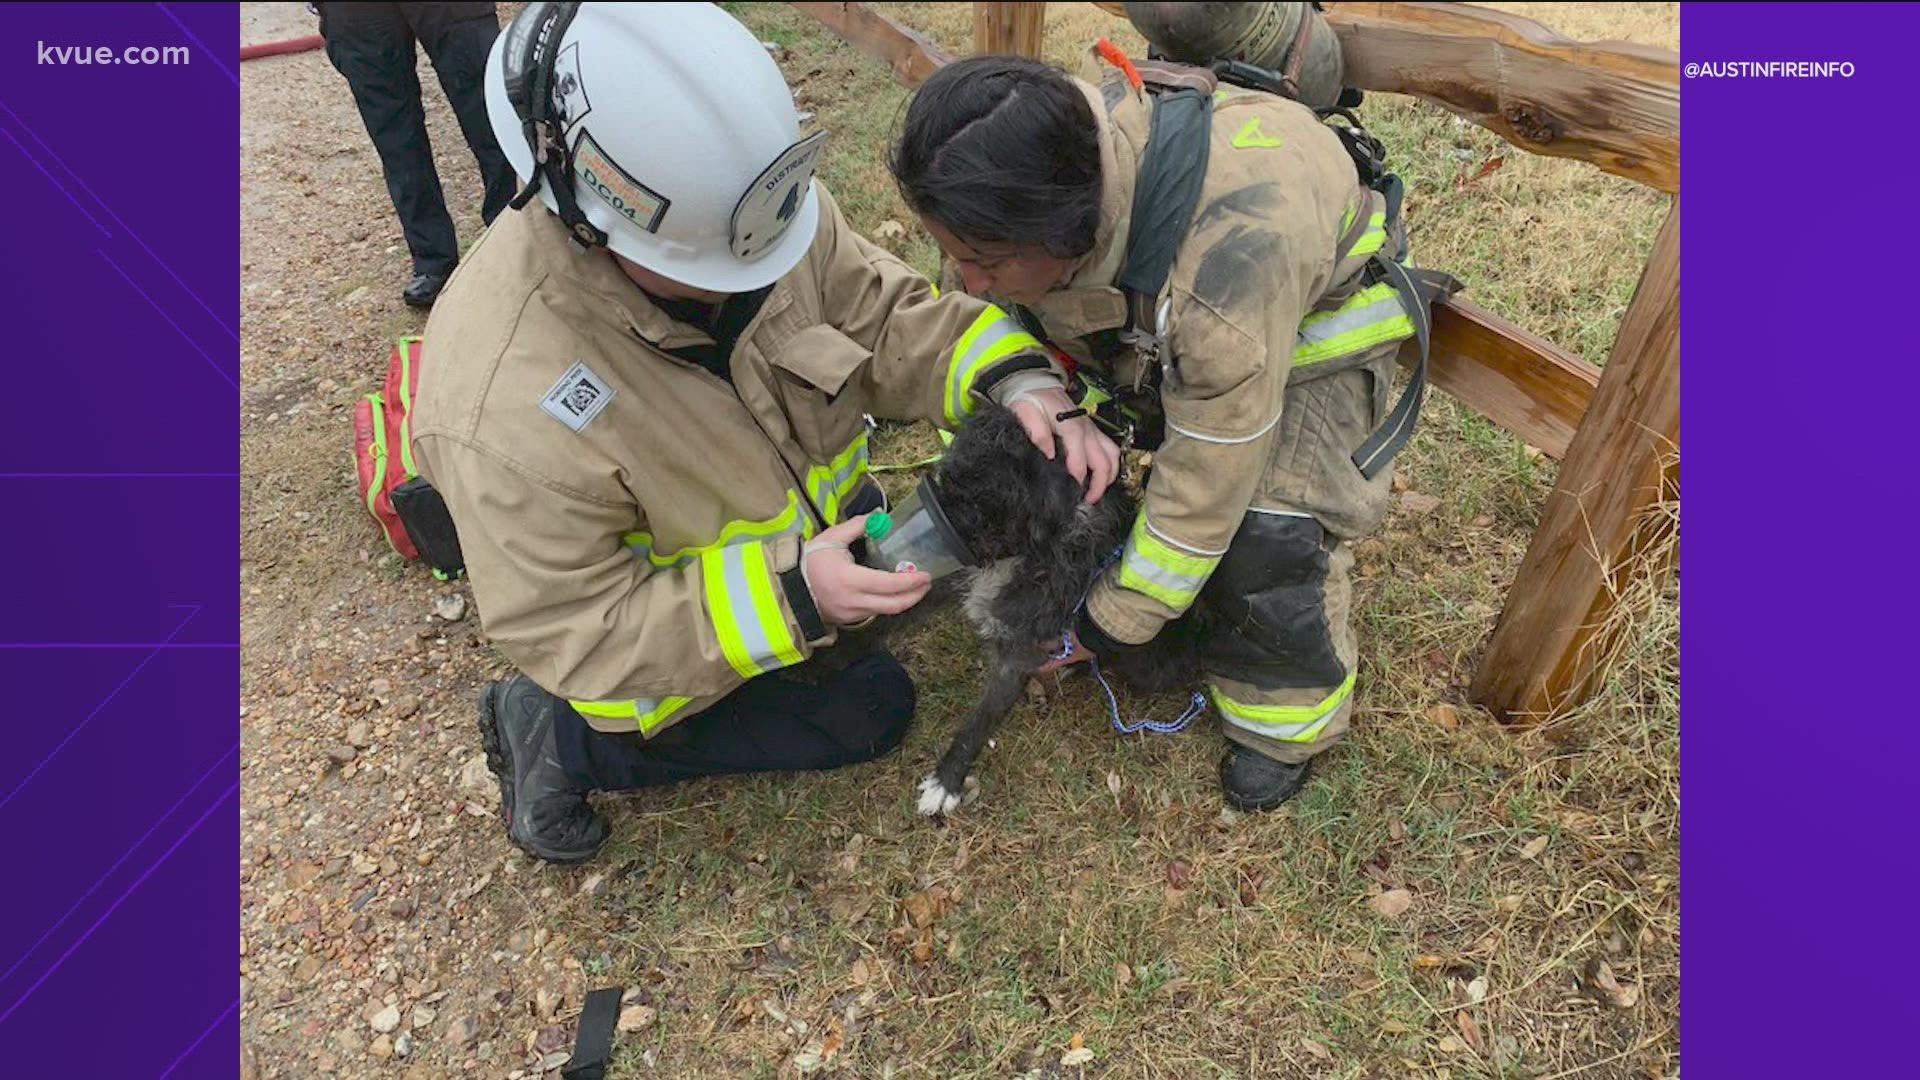 Firefighters and medics helped rescue a dog in one of the incidents, the AFD said.